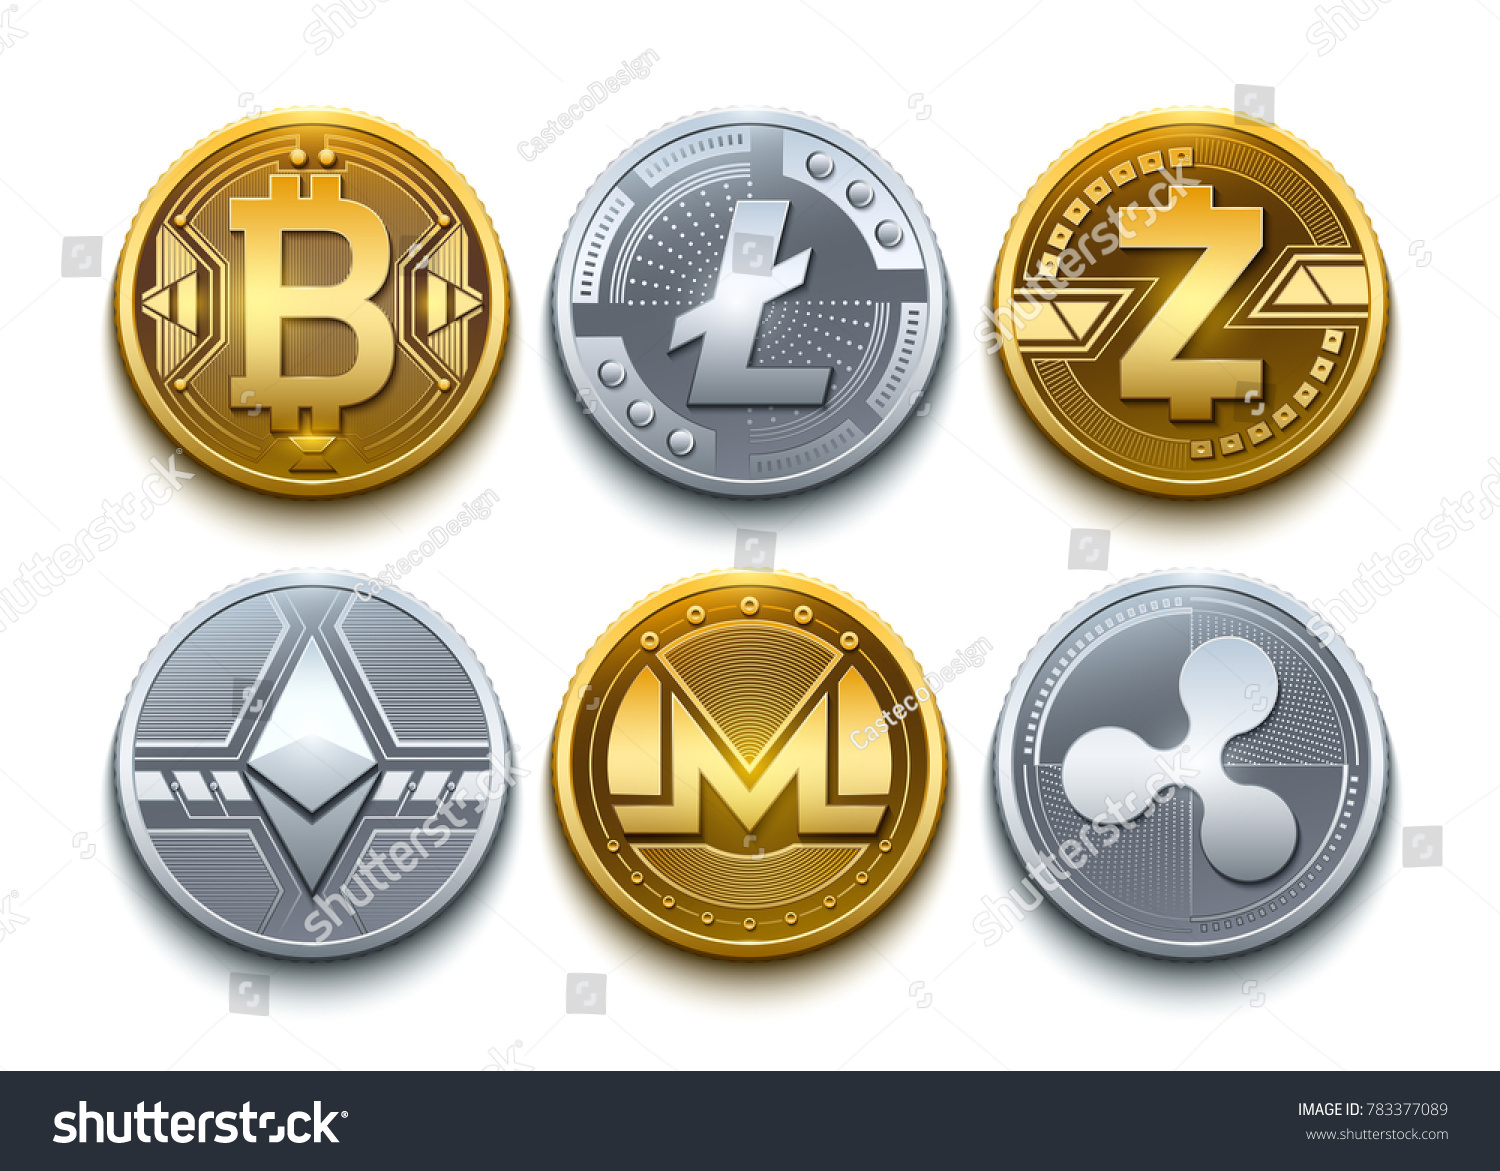 SVG of Digital vector cryptocurrency set icons. Bitcoin, Ethereum, Litecoin, Monero, Ripple, Zcash detailed coins svg